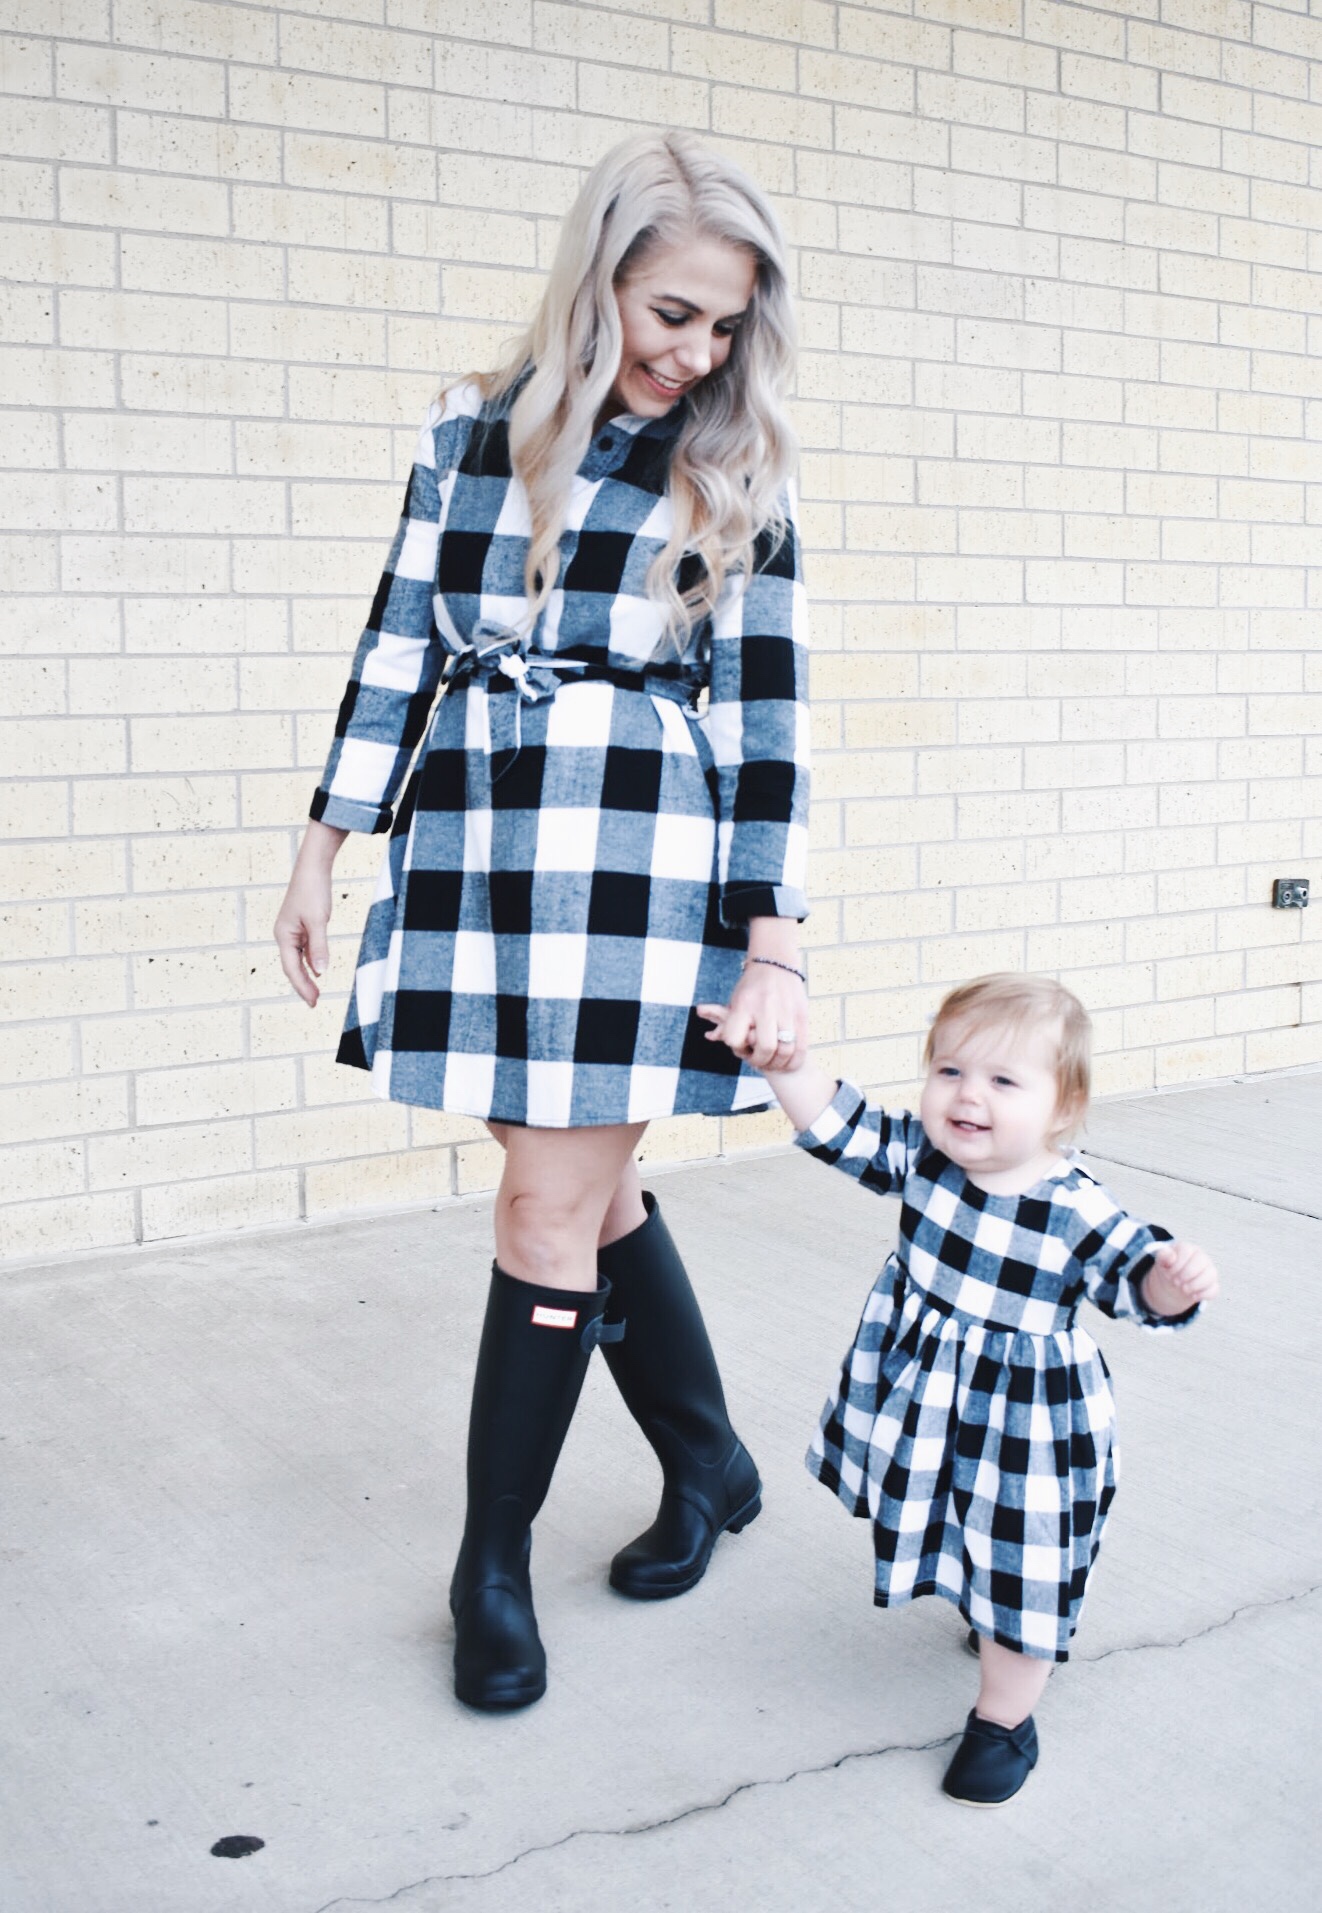 matching fall outfits for mom and daughter